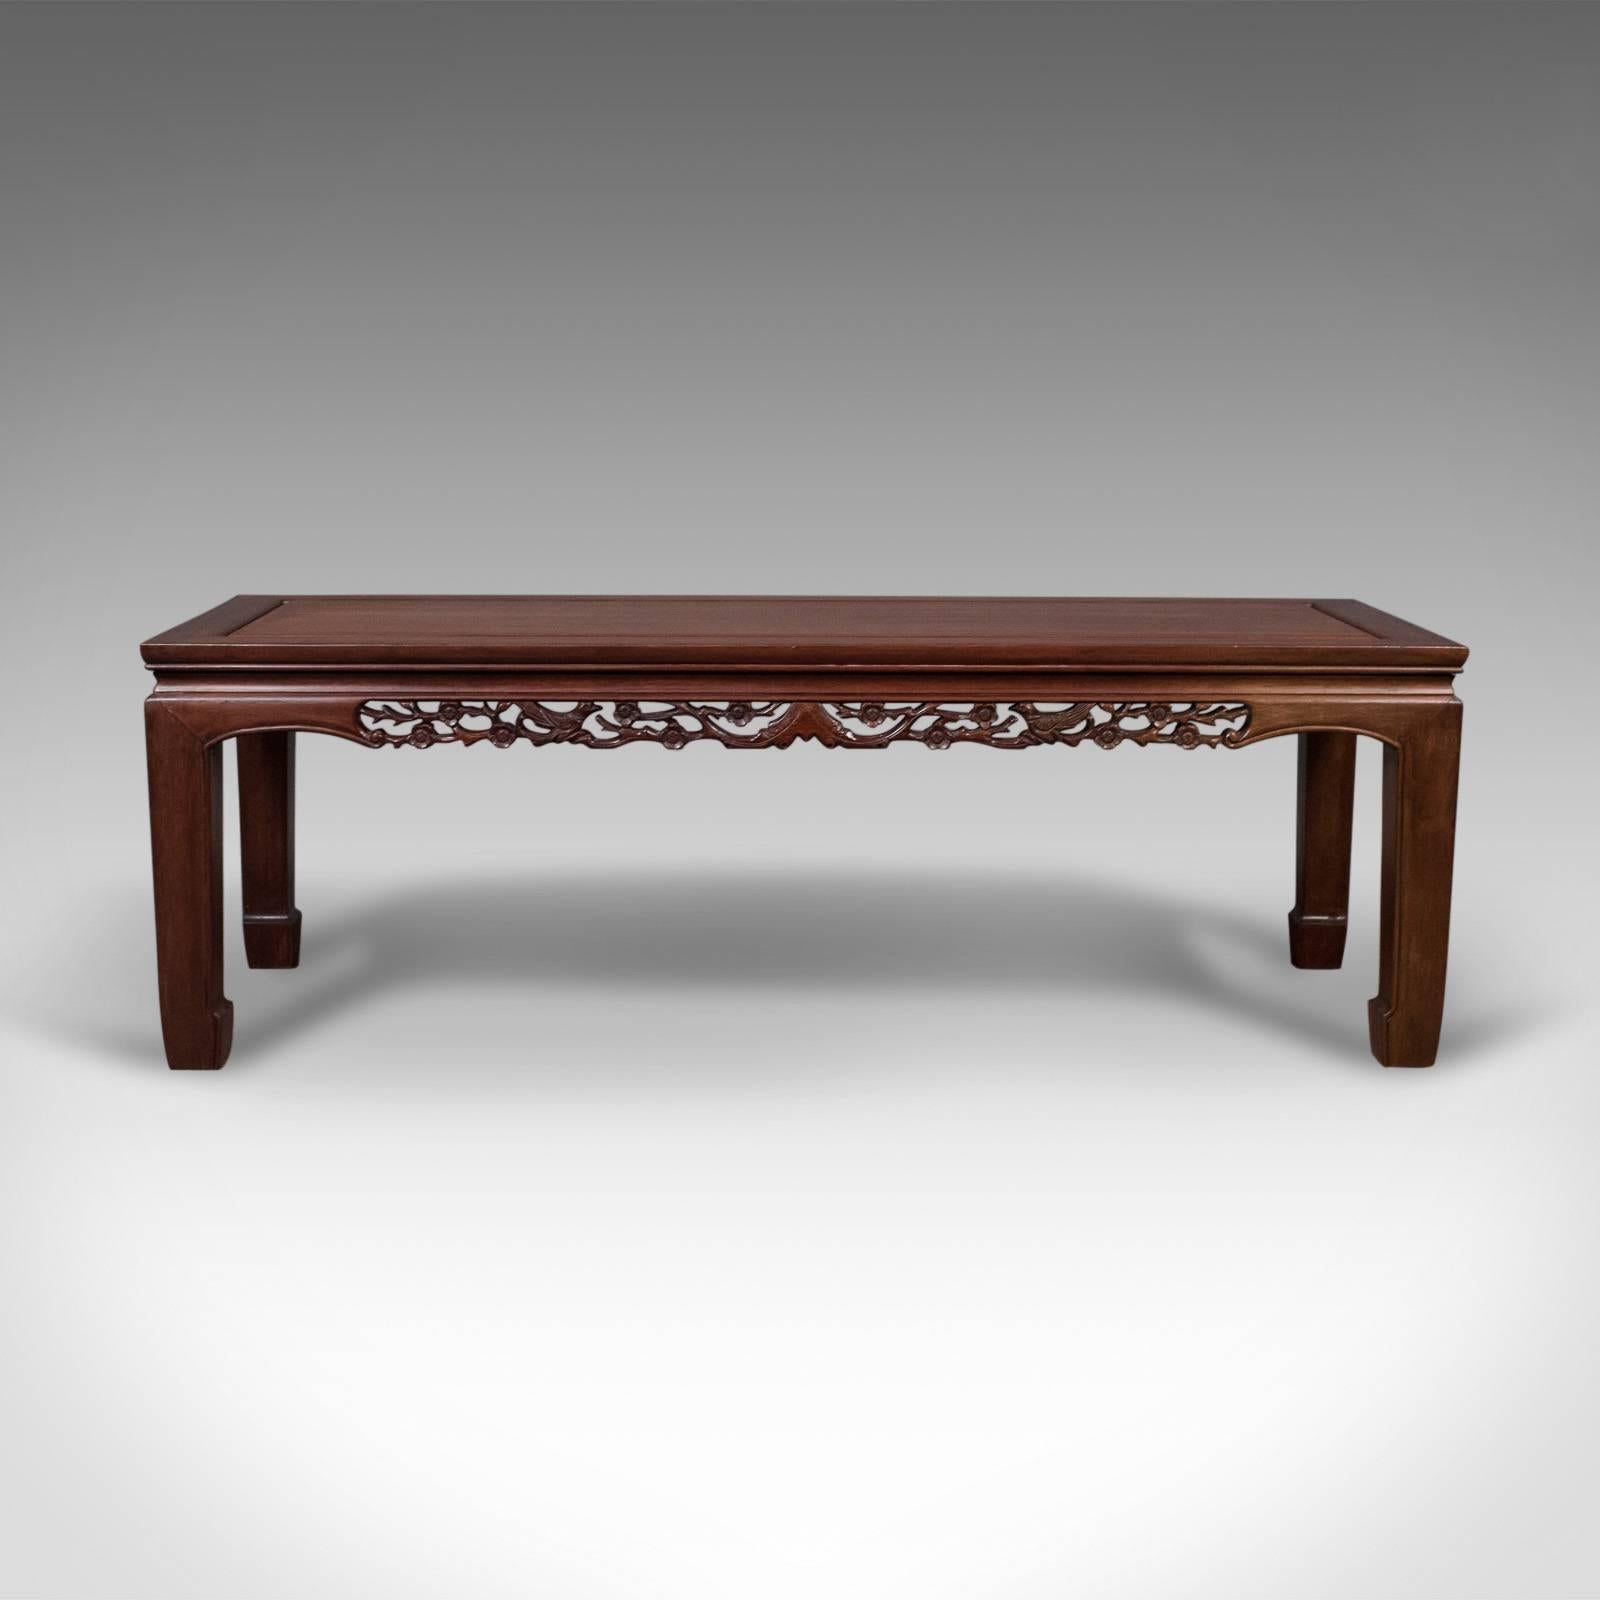 This is a midcentury Chinese rosewood coffee table in traditional form.

Rich, warm color in a satin waxed finish
The pierced carving a real feature of this otherwise typically understated piece
Well executed, depicting birds, flower heads and